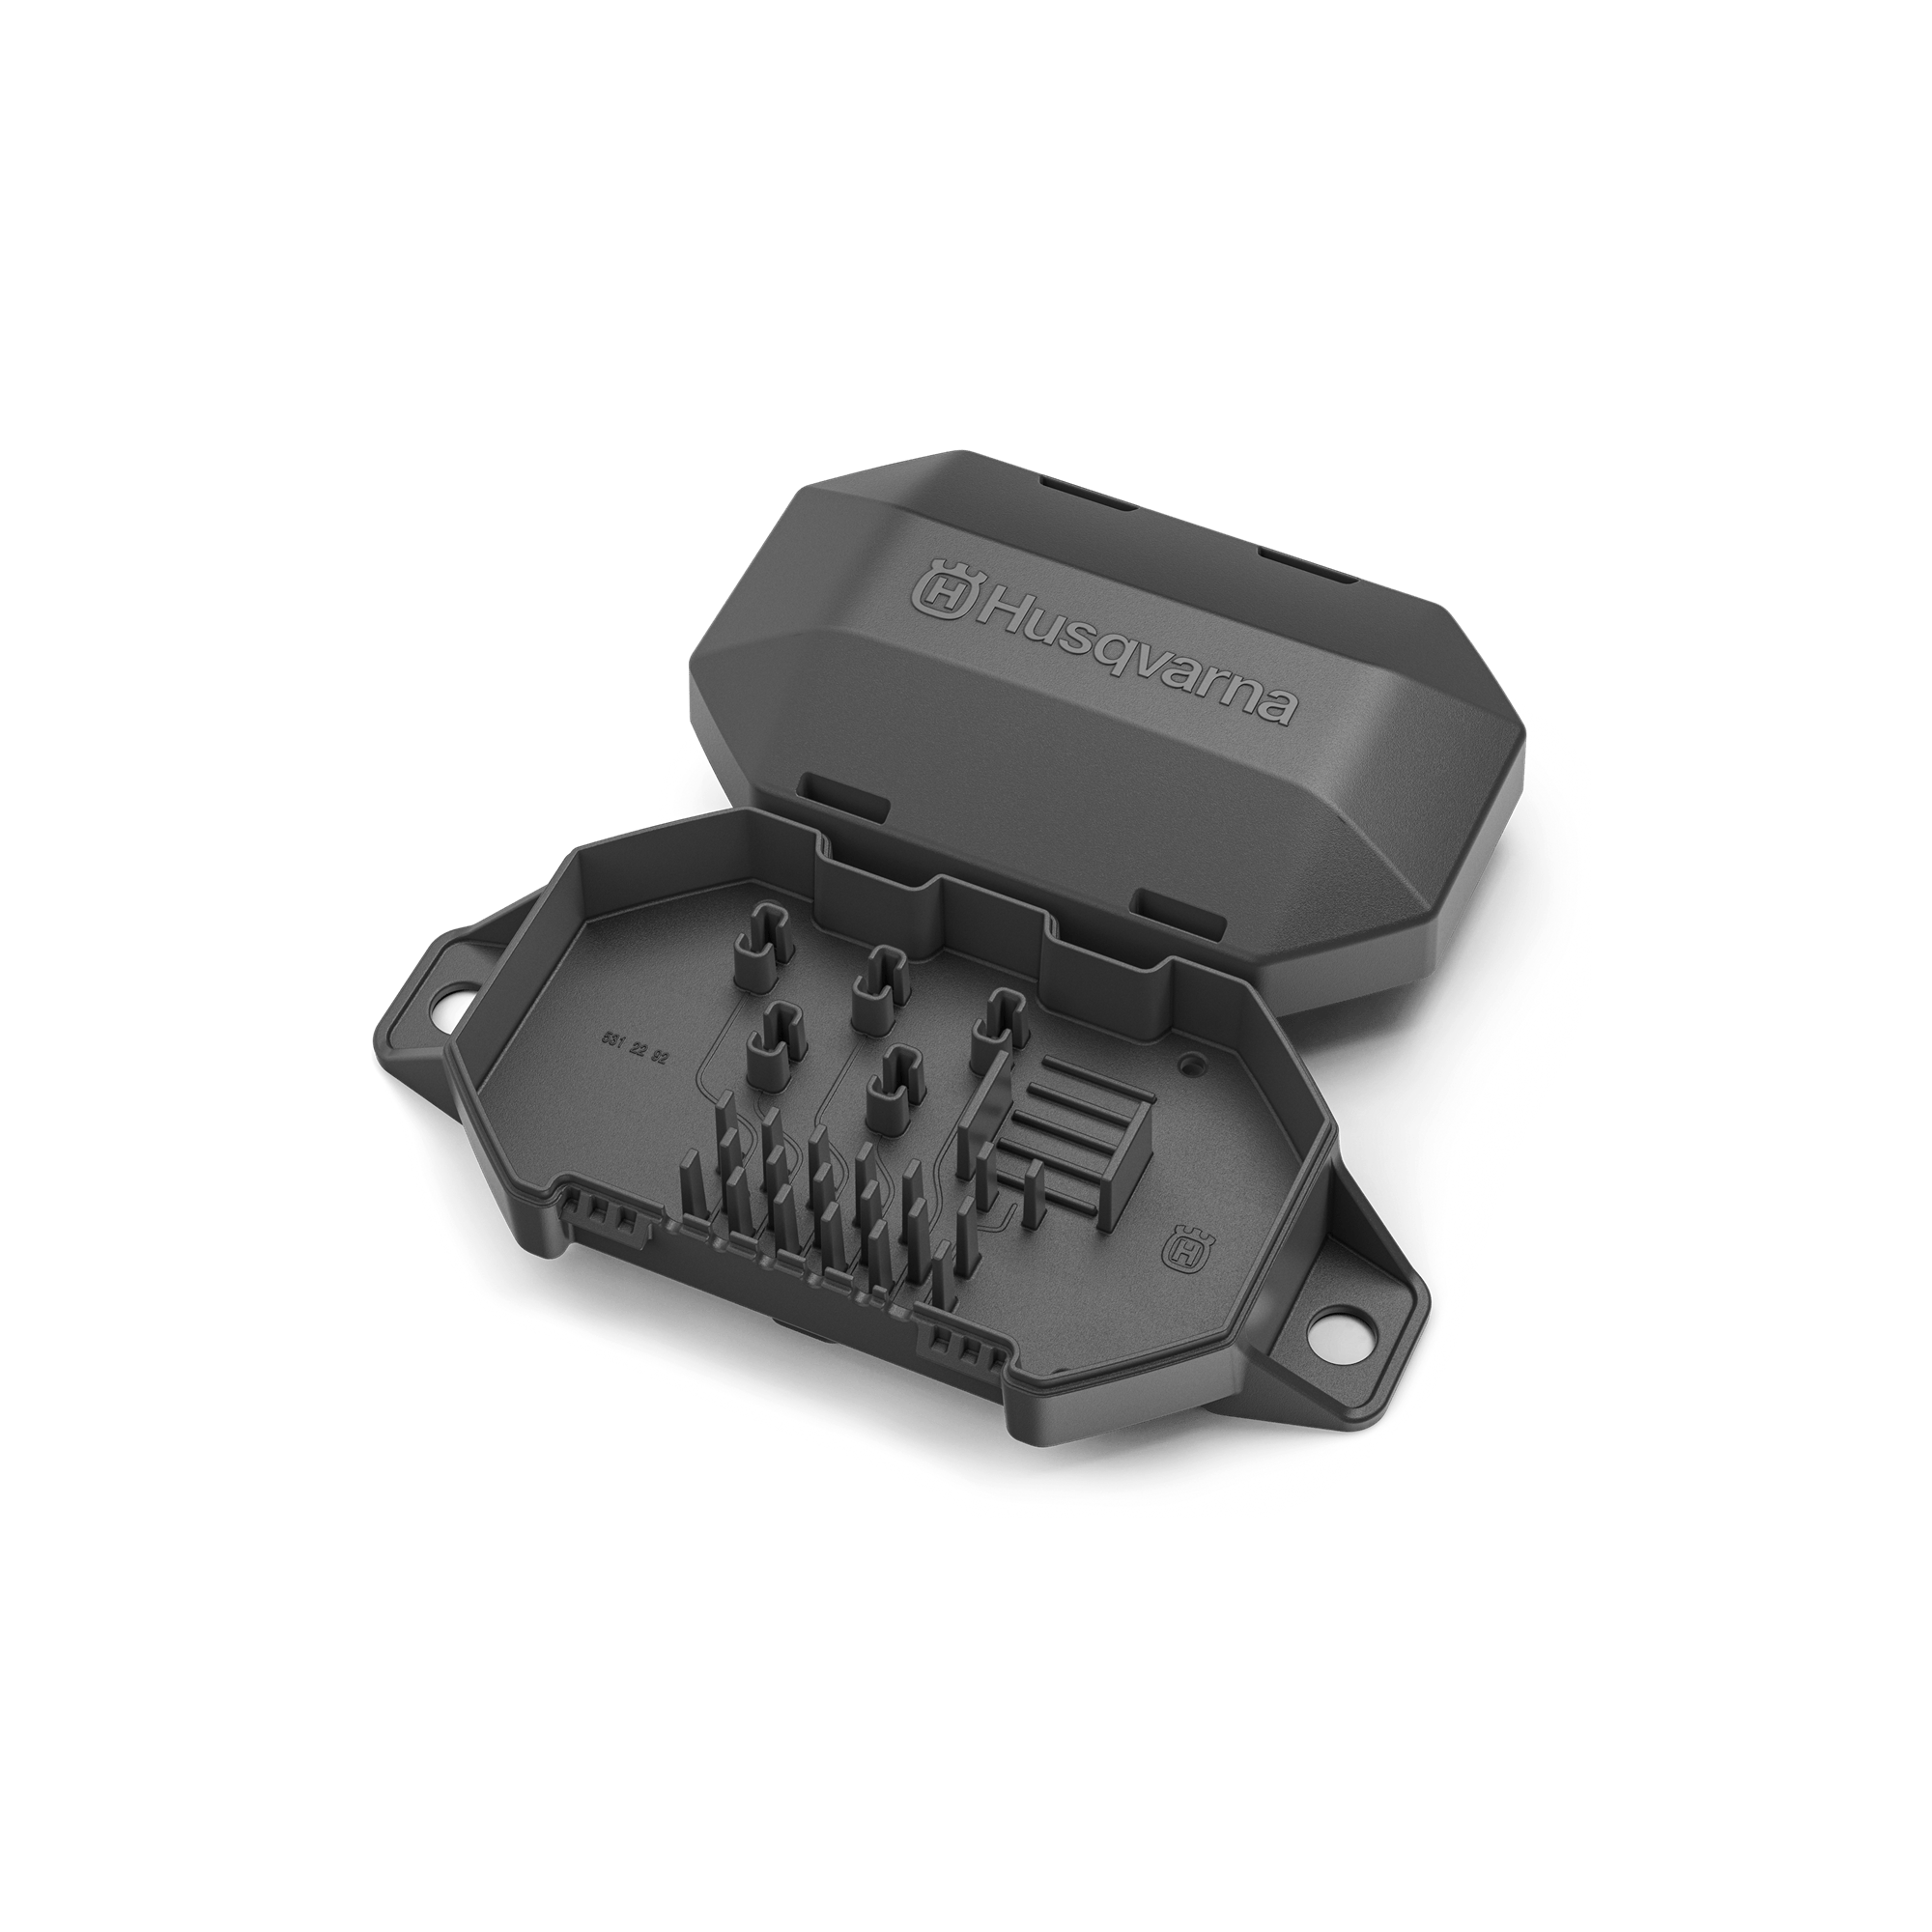 Image for Husqvarna Automower® Connector Protection Box from HusqvarnaB2C